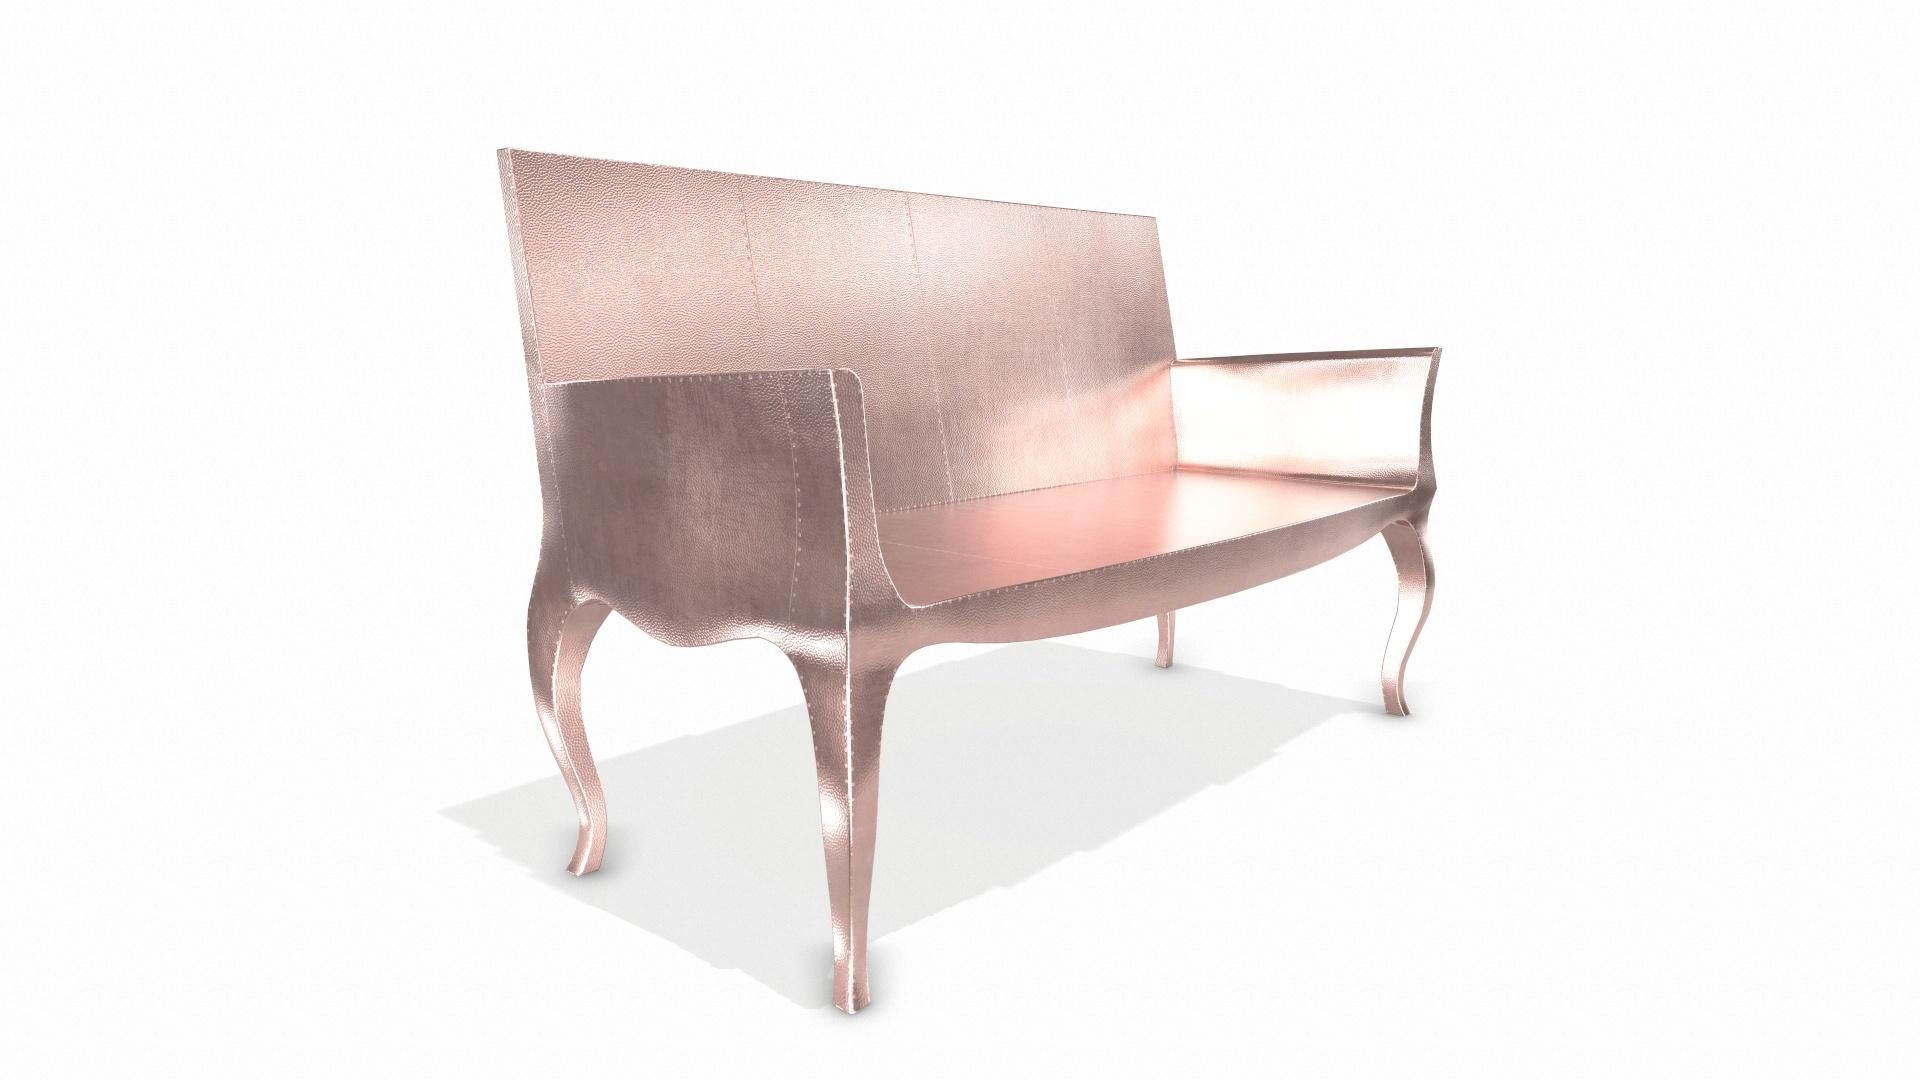 Louise Settee Art Deco Lounge Chairs in Mid. Hammered Copper by Paul Mathieu In New Condition For Sale In New York, NY